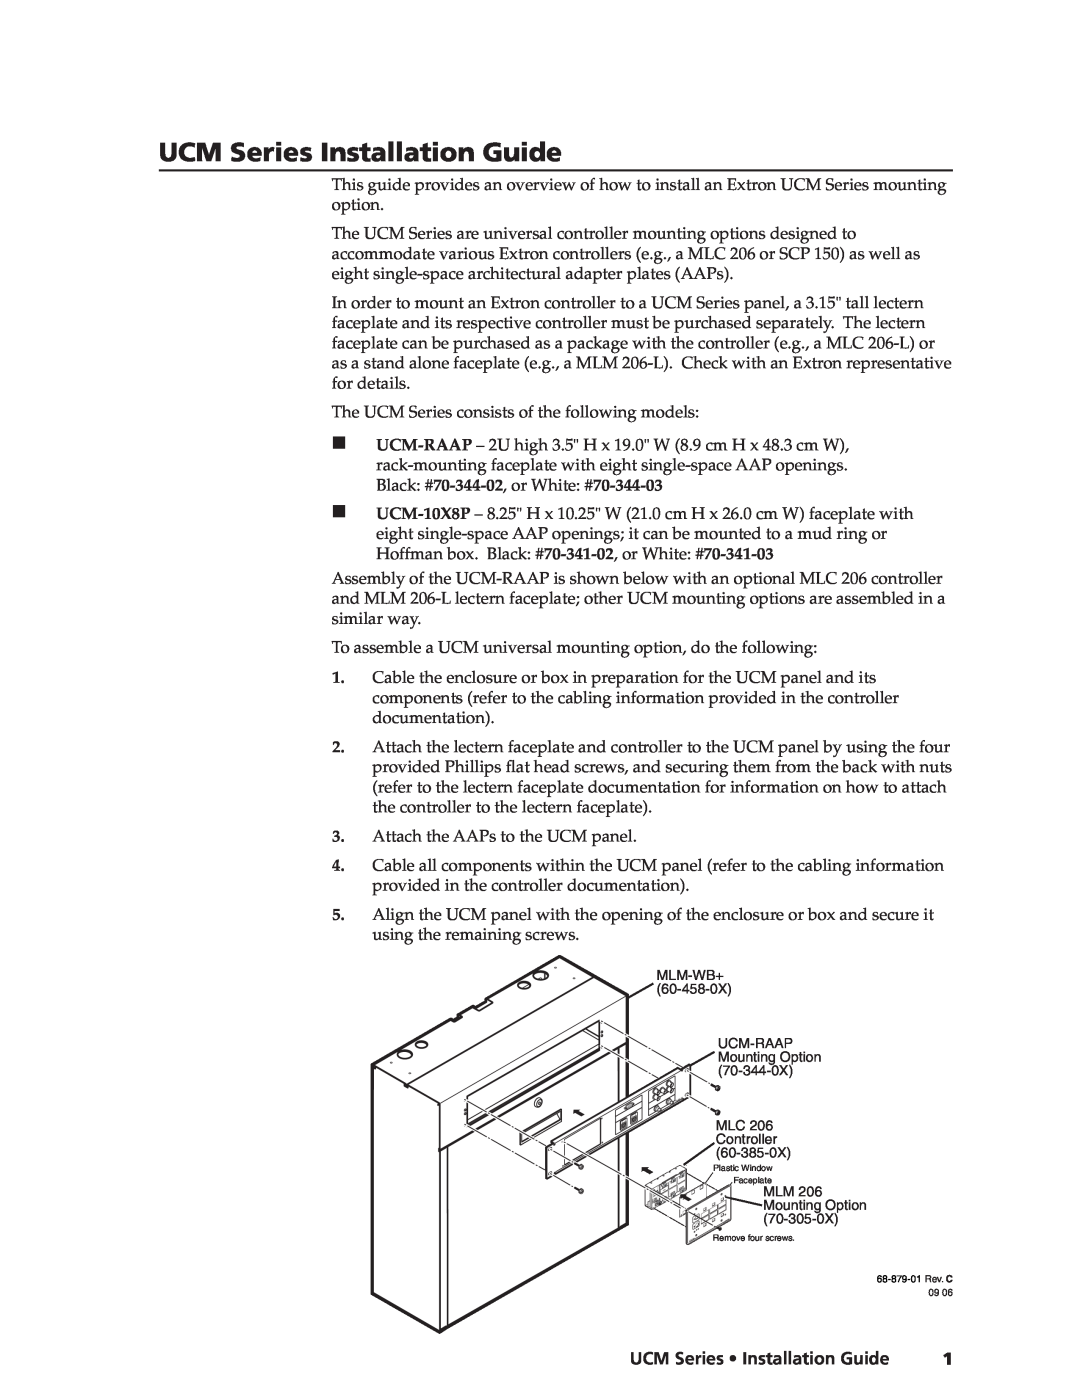 Extron electronic UCM-RAAP, UCM-10X8P manual UCM Series Installation Guide 